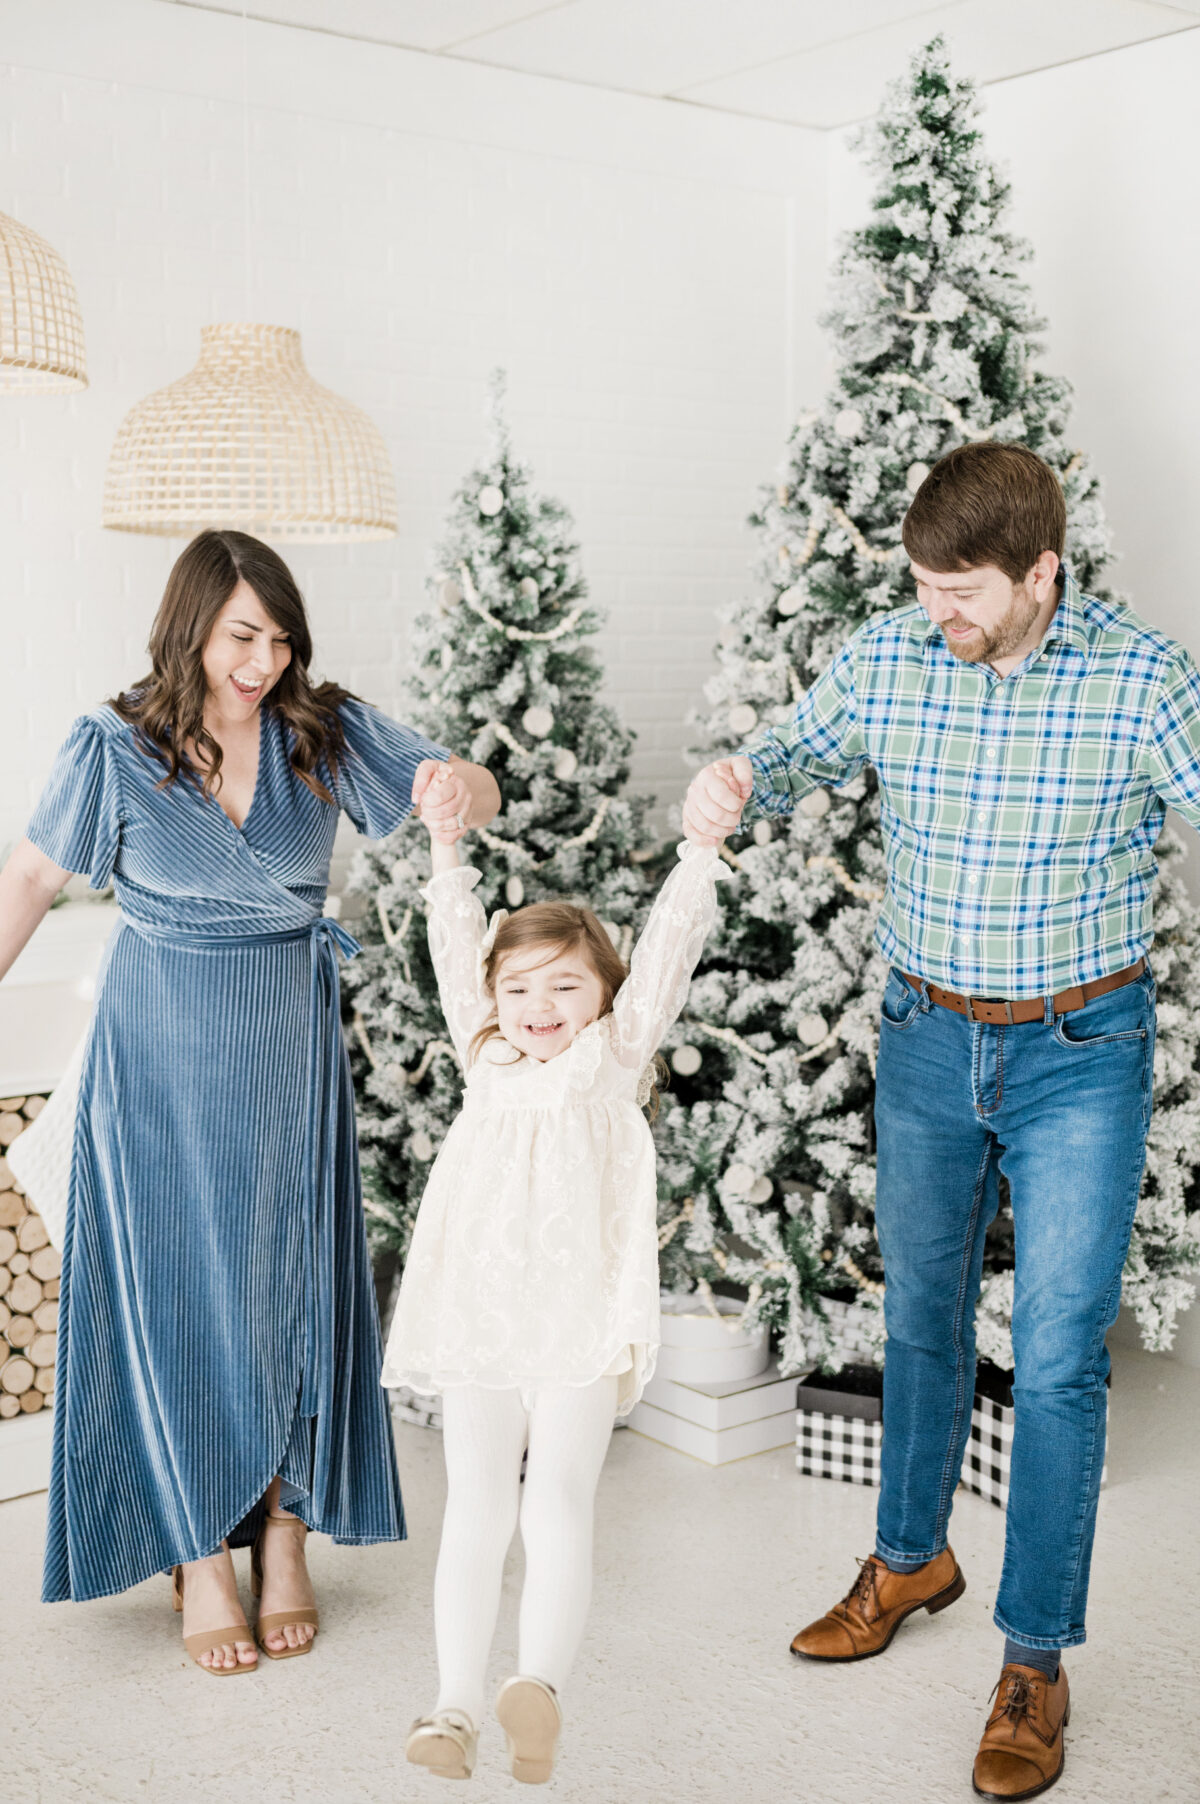 Brittney Naylor in maxi blue velvet dress, holding daughters hand, and husband John holding other hand of daughter wearing jeans and shirt, in front of fireplace and christmas tree